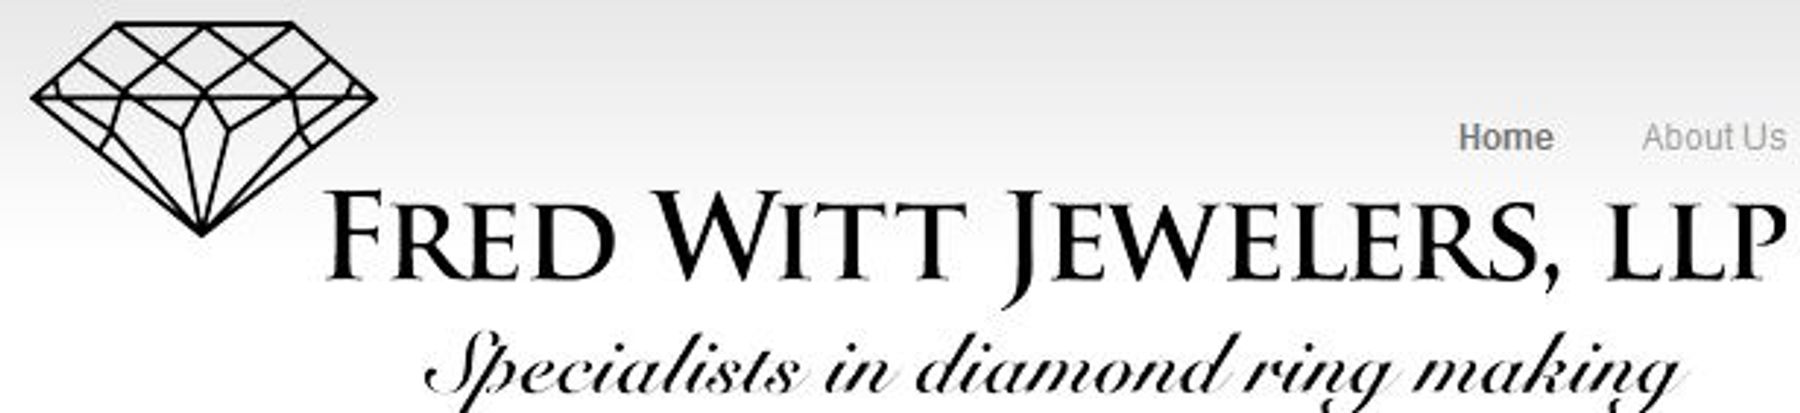 Fred Witt Jewelers L.L.P. | Downtown Lincoln